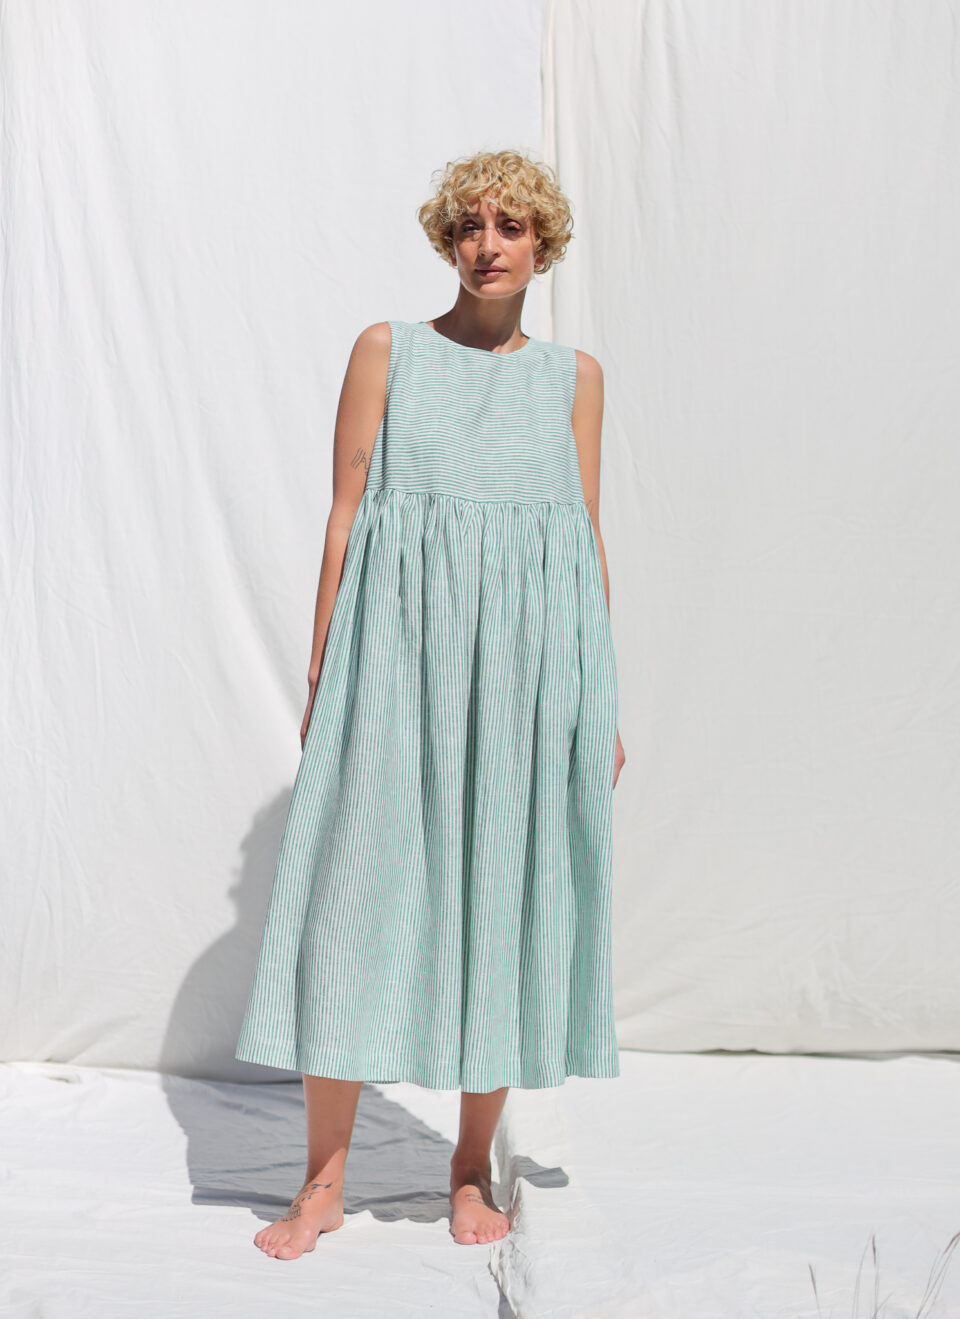 Sleeveless linen smock dress in green stripes | Dress | Sustainable clothing | OffOn clothing